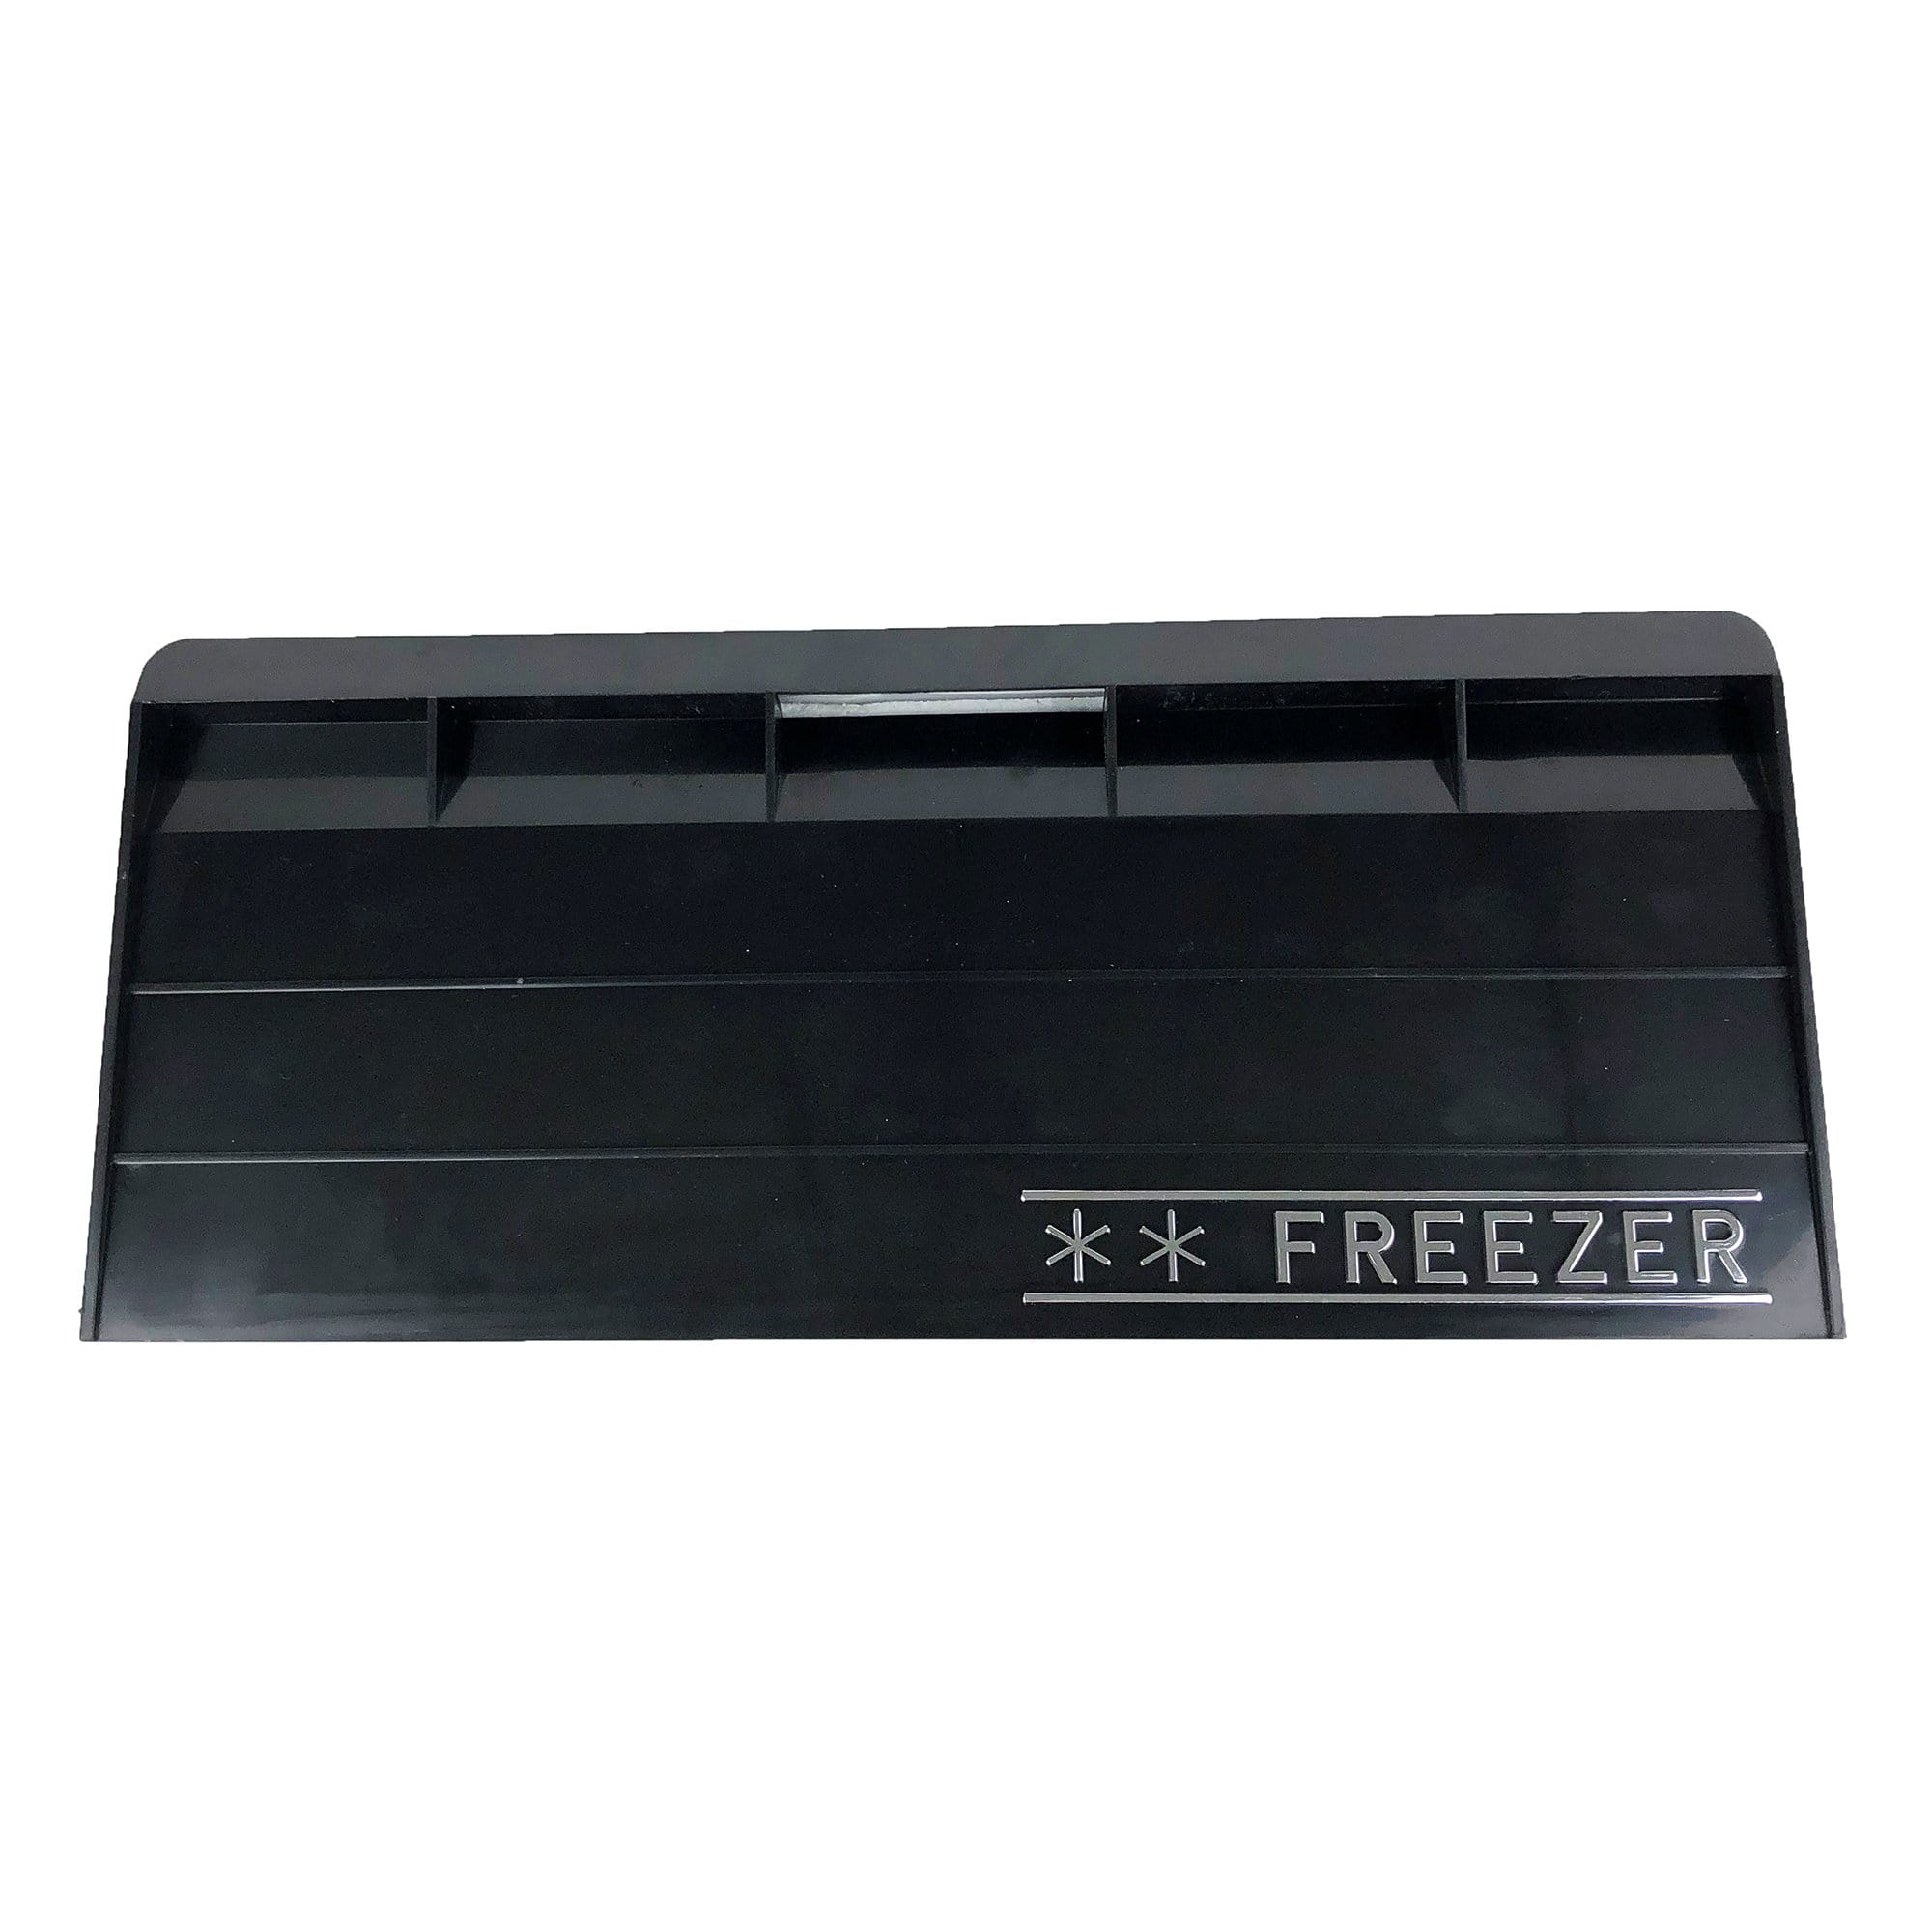 Thetford-Norcold 160003830 Freezer Door Assembly for Norcold DE0788